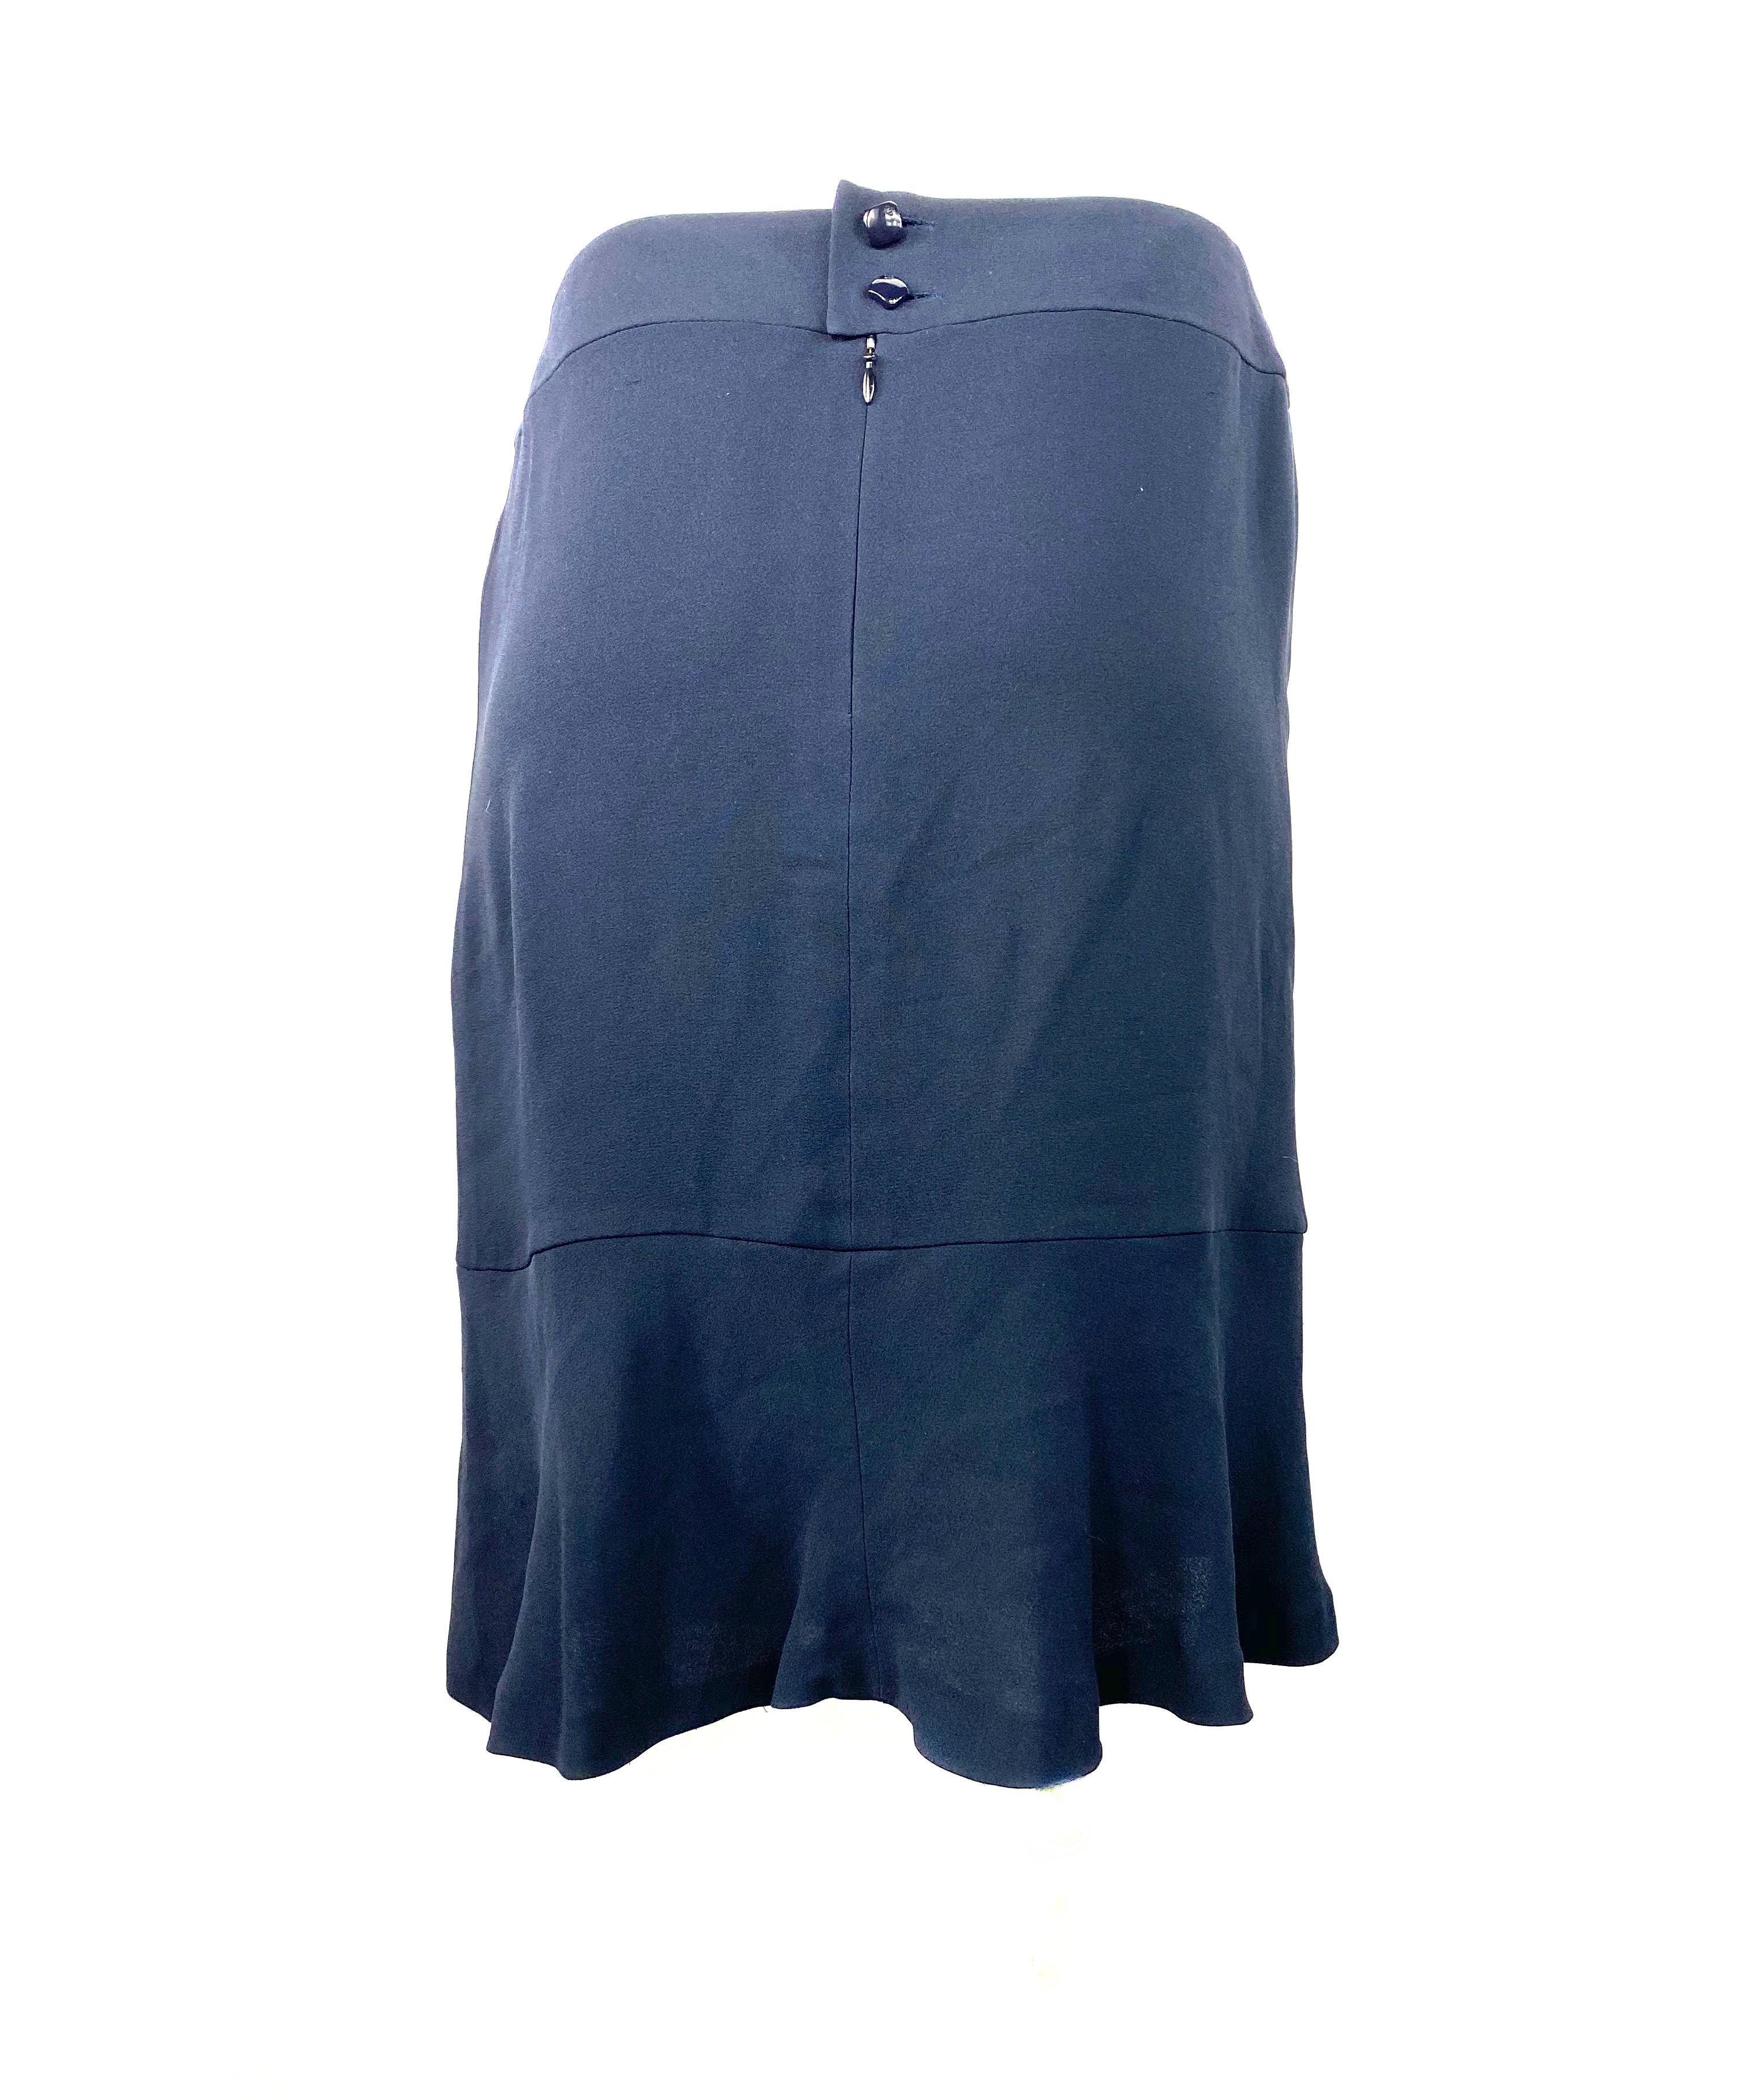 Chanel Navy Silk Midi Skirt Size 42 In Excellent Condition For Sale In Beverly Hills, CA